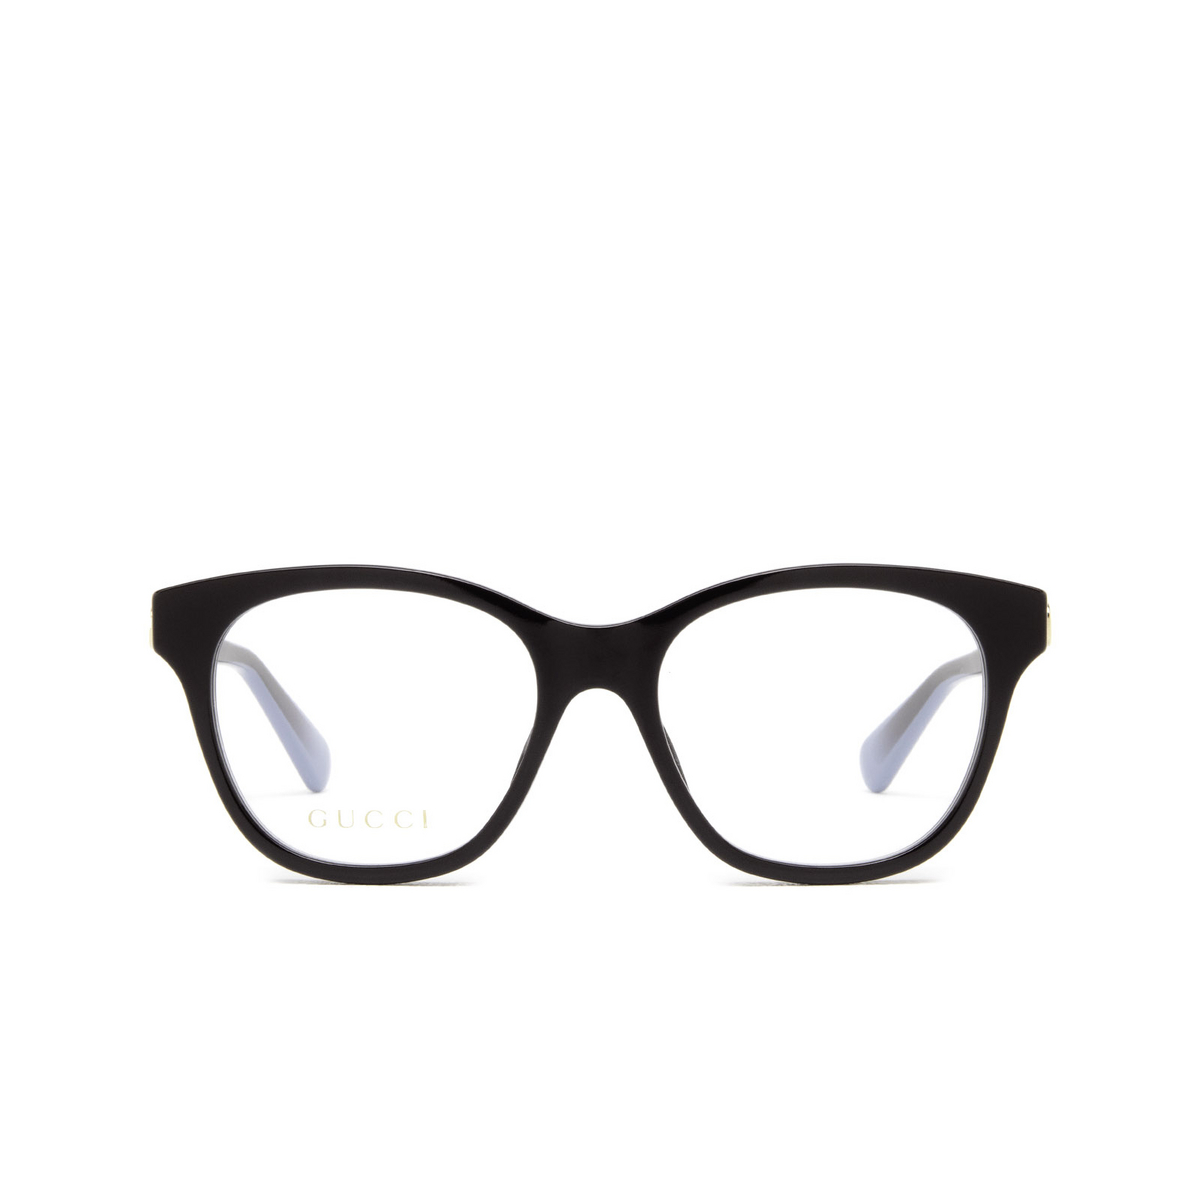 Gucci® Square Eyeglasses: GG0923O color Brown 004 - front view.